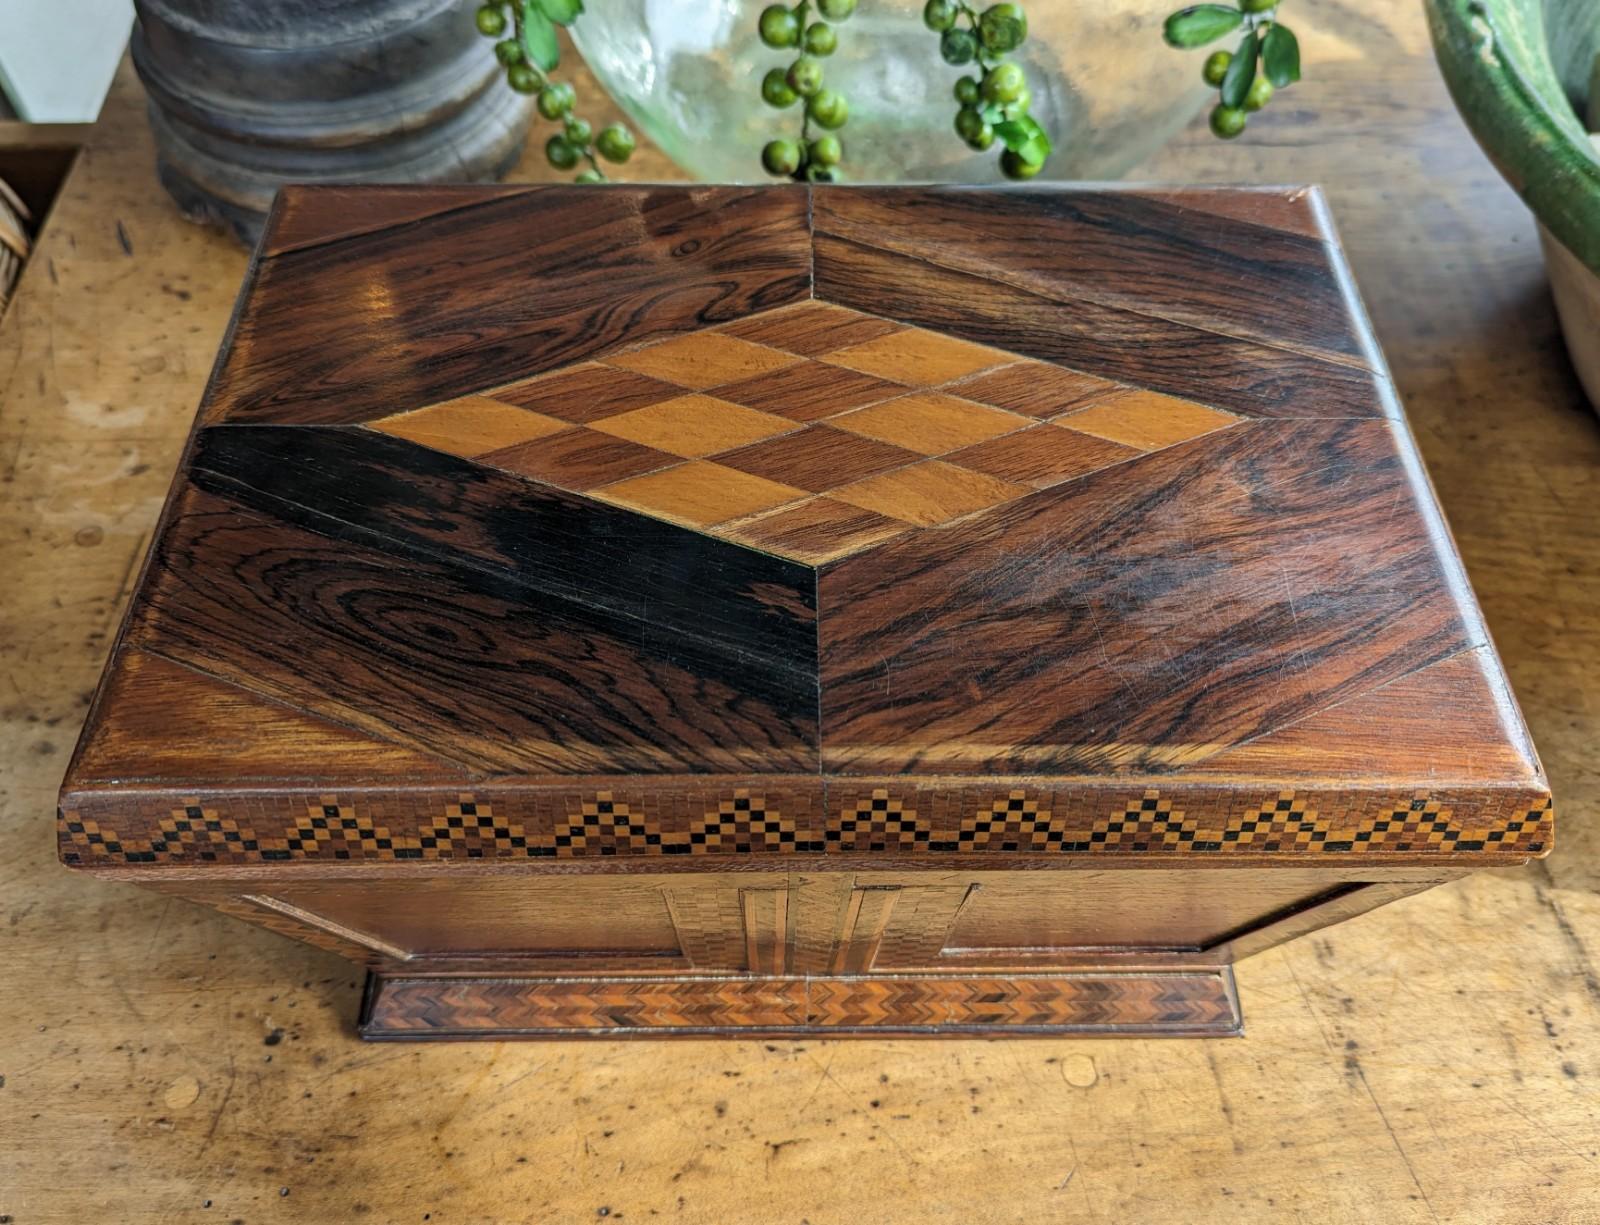 A finely crafted antique wood marquetry box with hinged lid and green fabric interior. This box has a refined geometric design featuring both checkered and diamond shaped patterns on a sarcophagus shape. Measures 12.5 inches in width by 7.5 inches